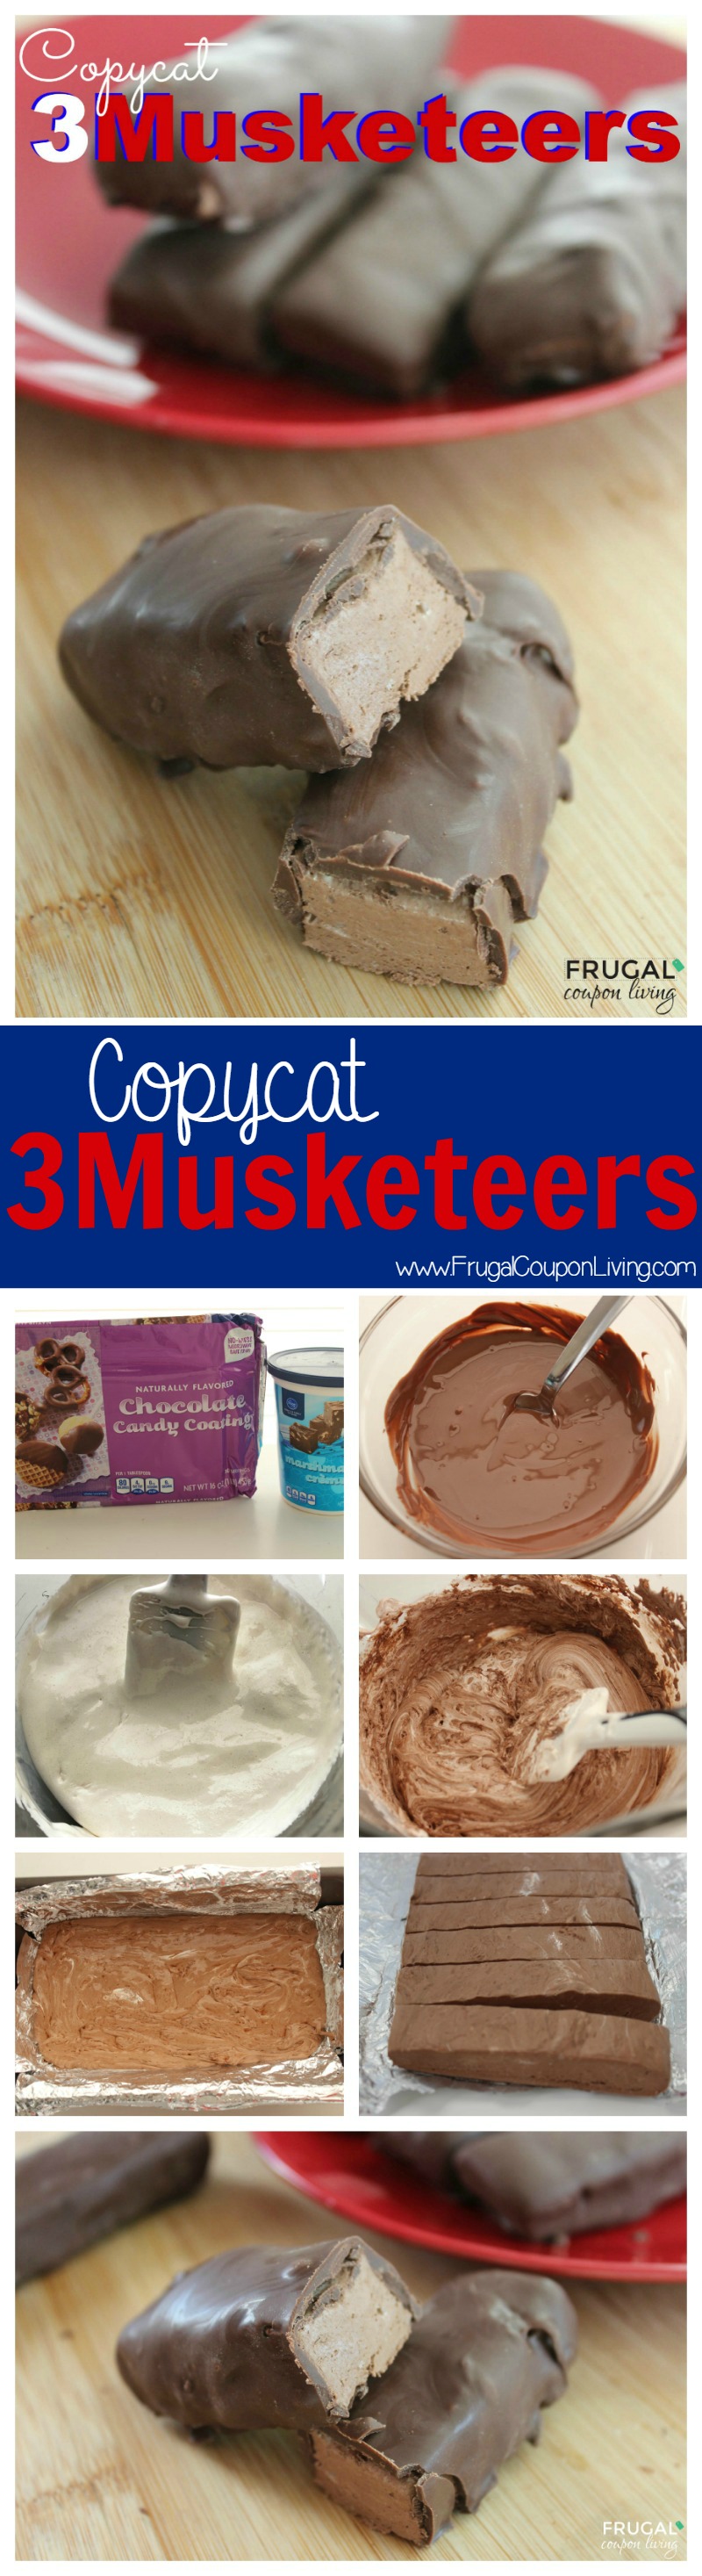 copycat-3-musketeers-Collage-frugal-coupon-living